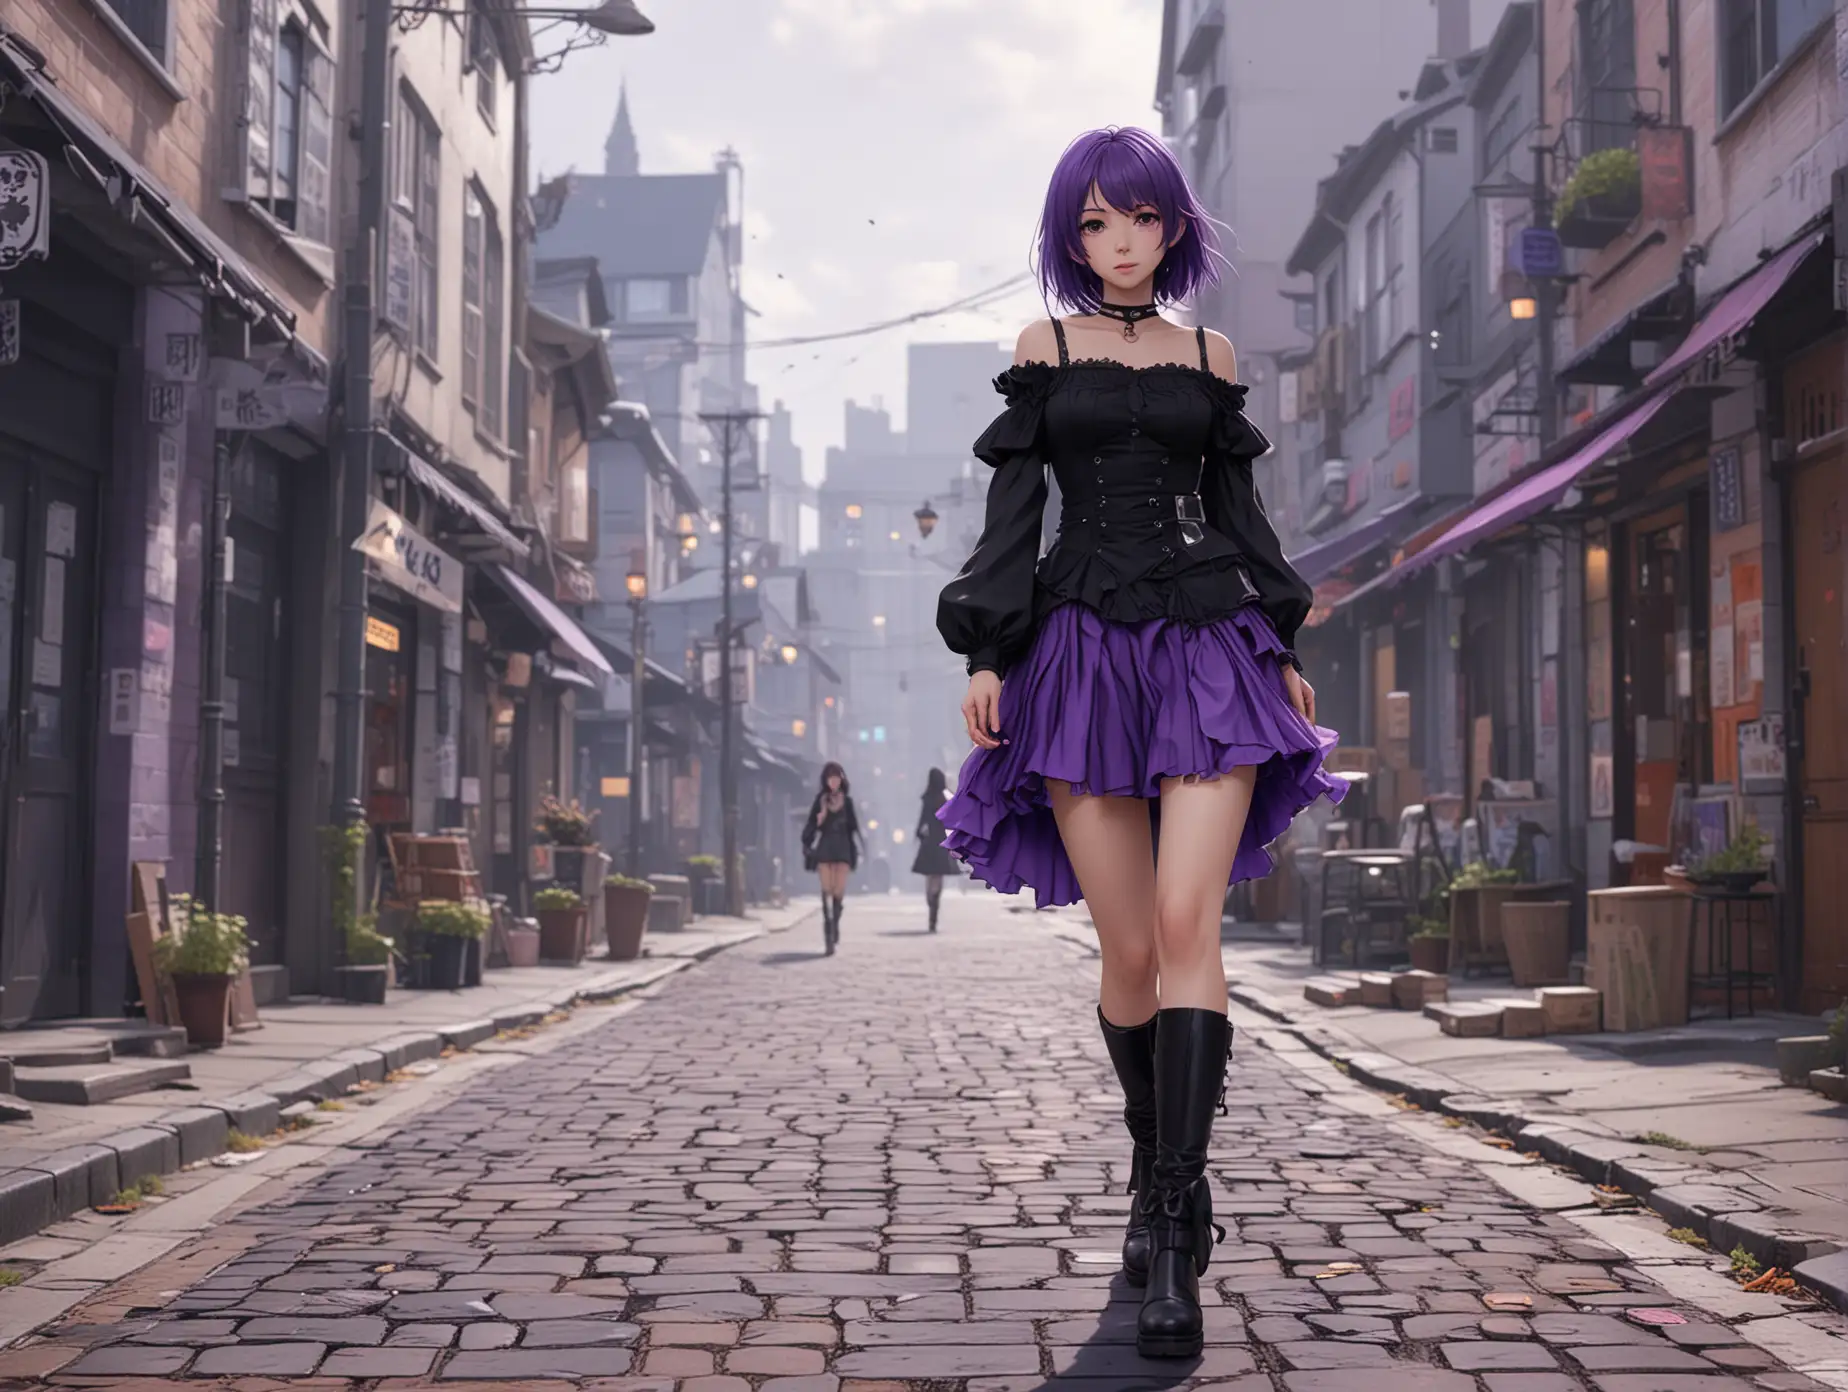 wearing a purple skirt and black boots walking on the street of anime style 4 k, 4k anime wallpaper, anime wallpaper4k, anime wallpaper4k, anime art tabletop4k, anime art wallpaper 4 k, anime art wallpaper 8 k, wearing a black dress anime girl, anime style. 8K, her gothic city street behind